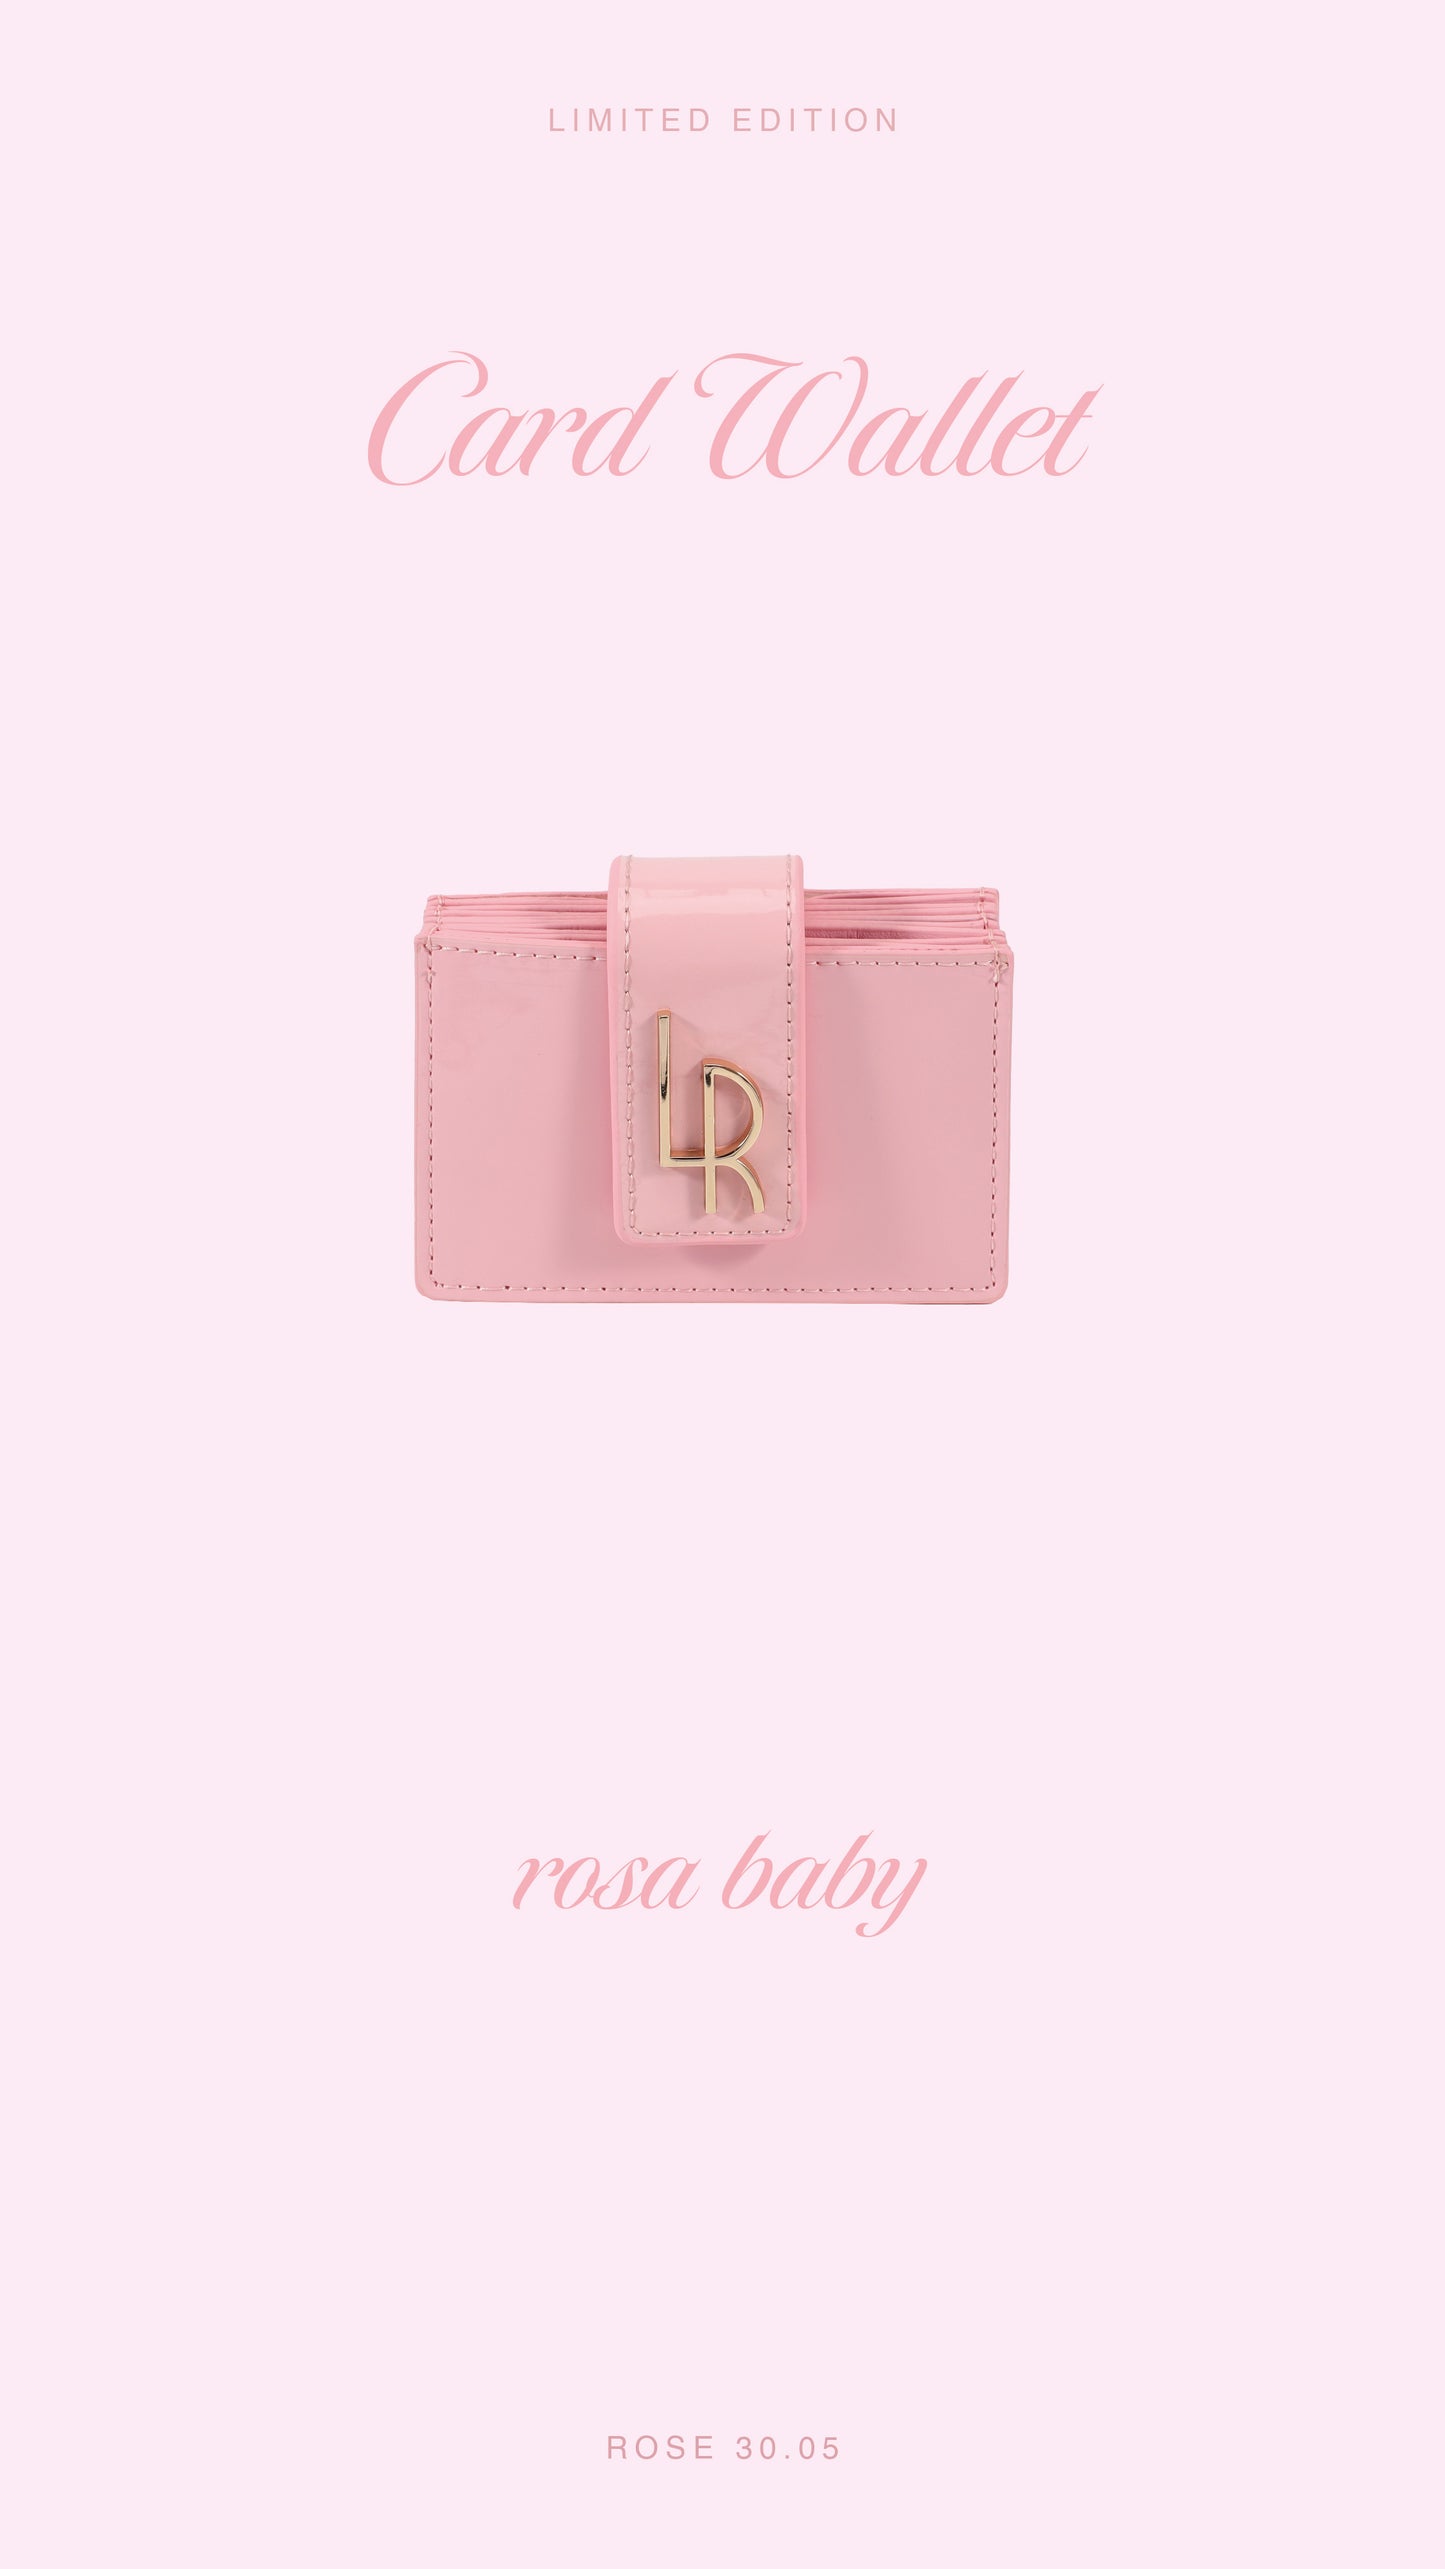 ROSE CARD WALLET 30.05 LE - PINK BABY